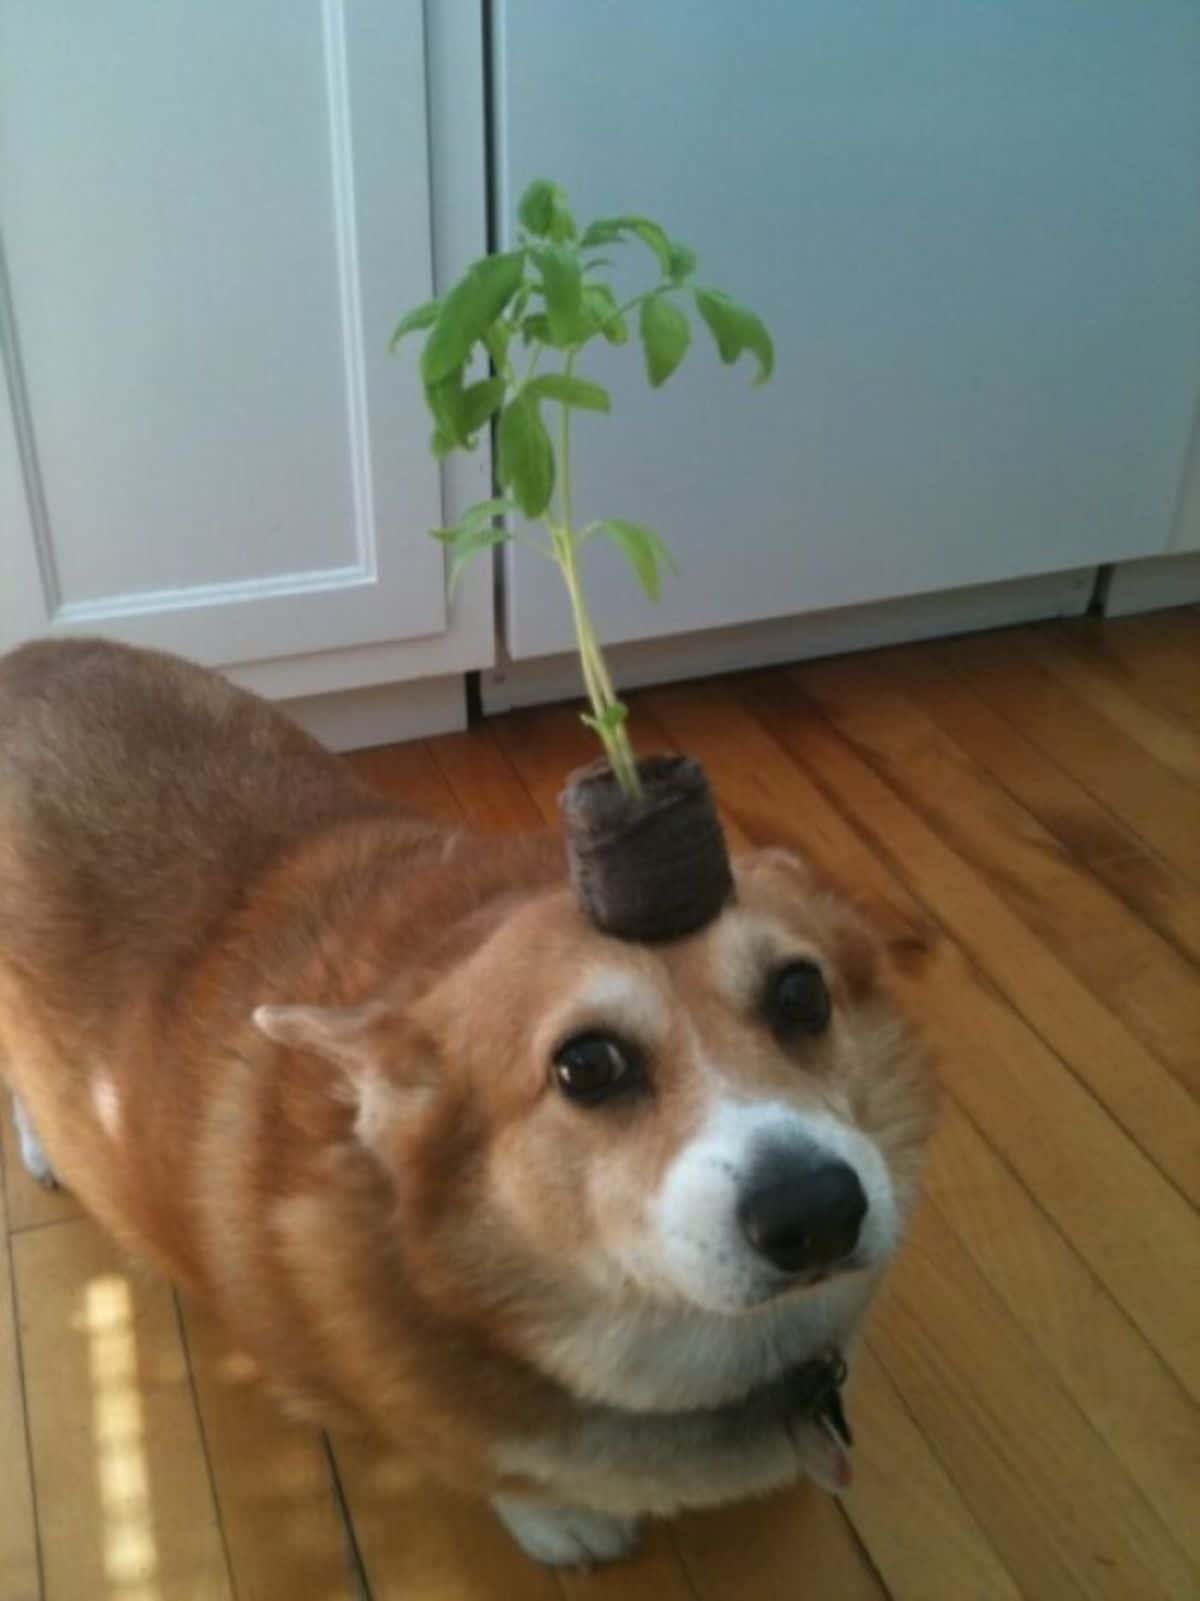 brown and white corgi standing on the wooden floor with a small plant on its head